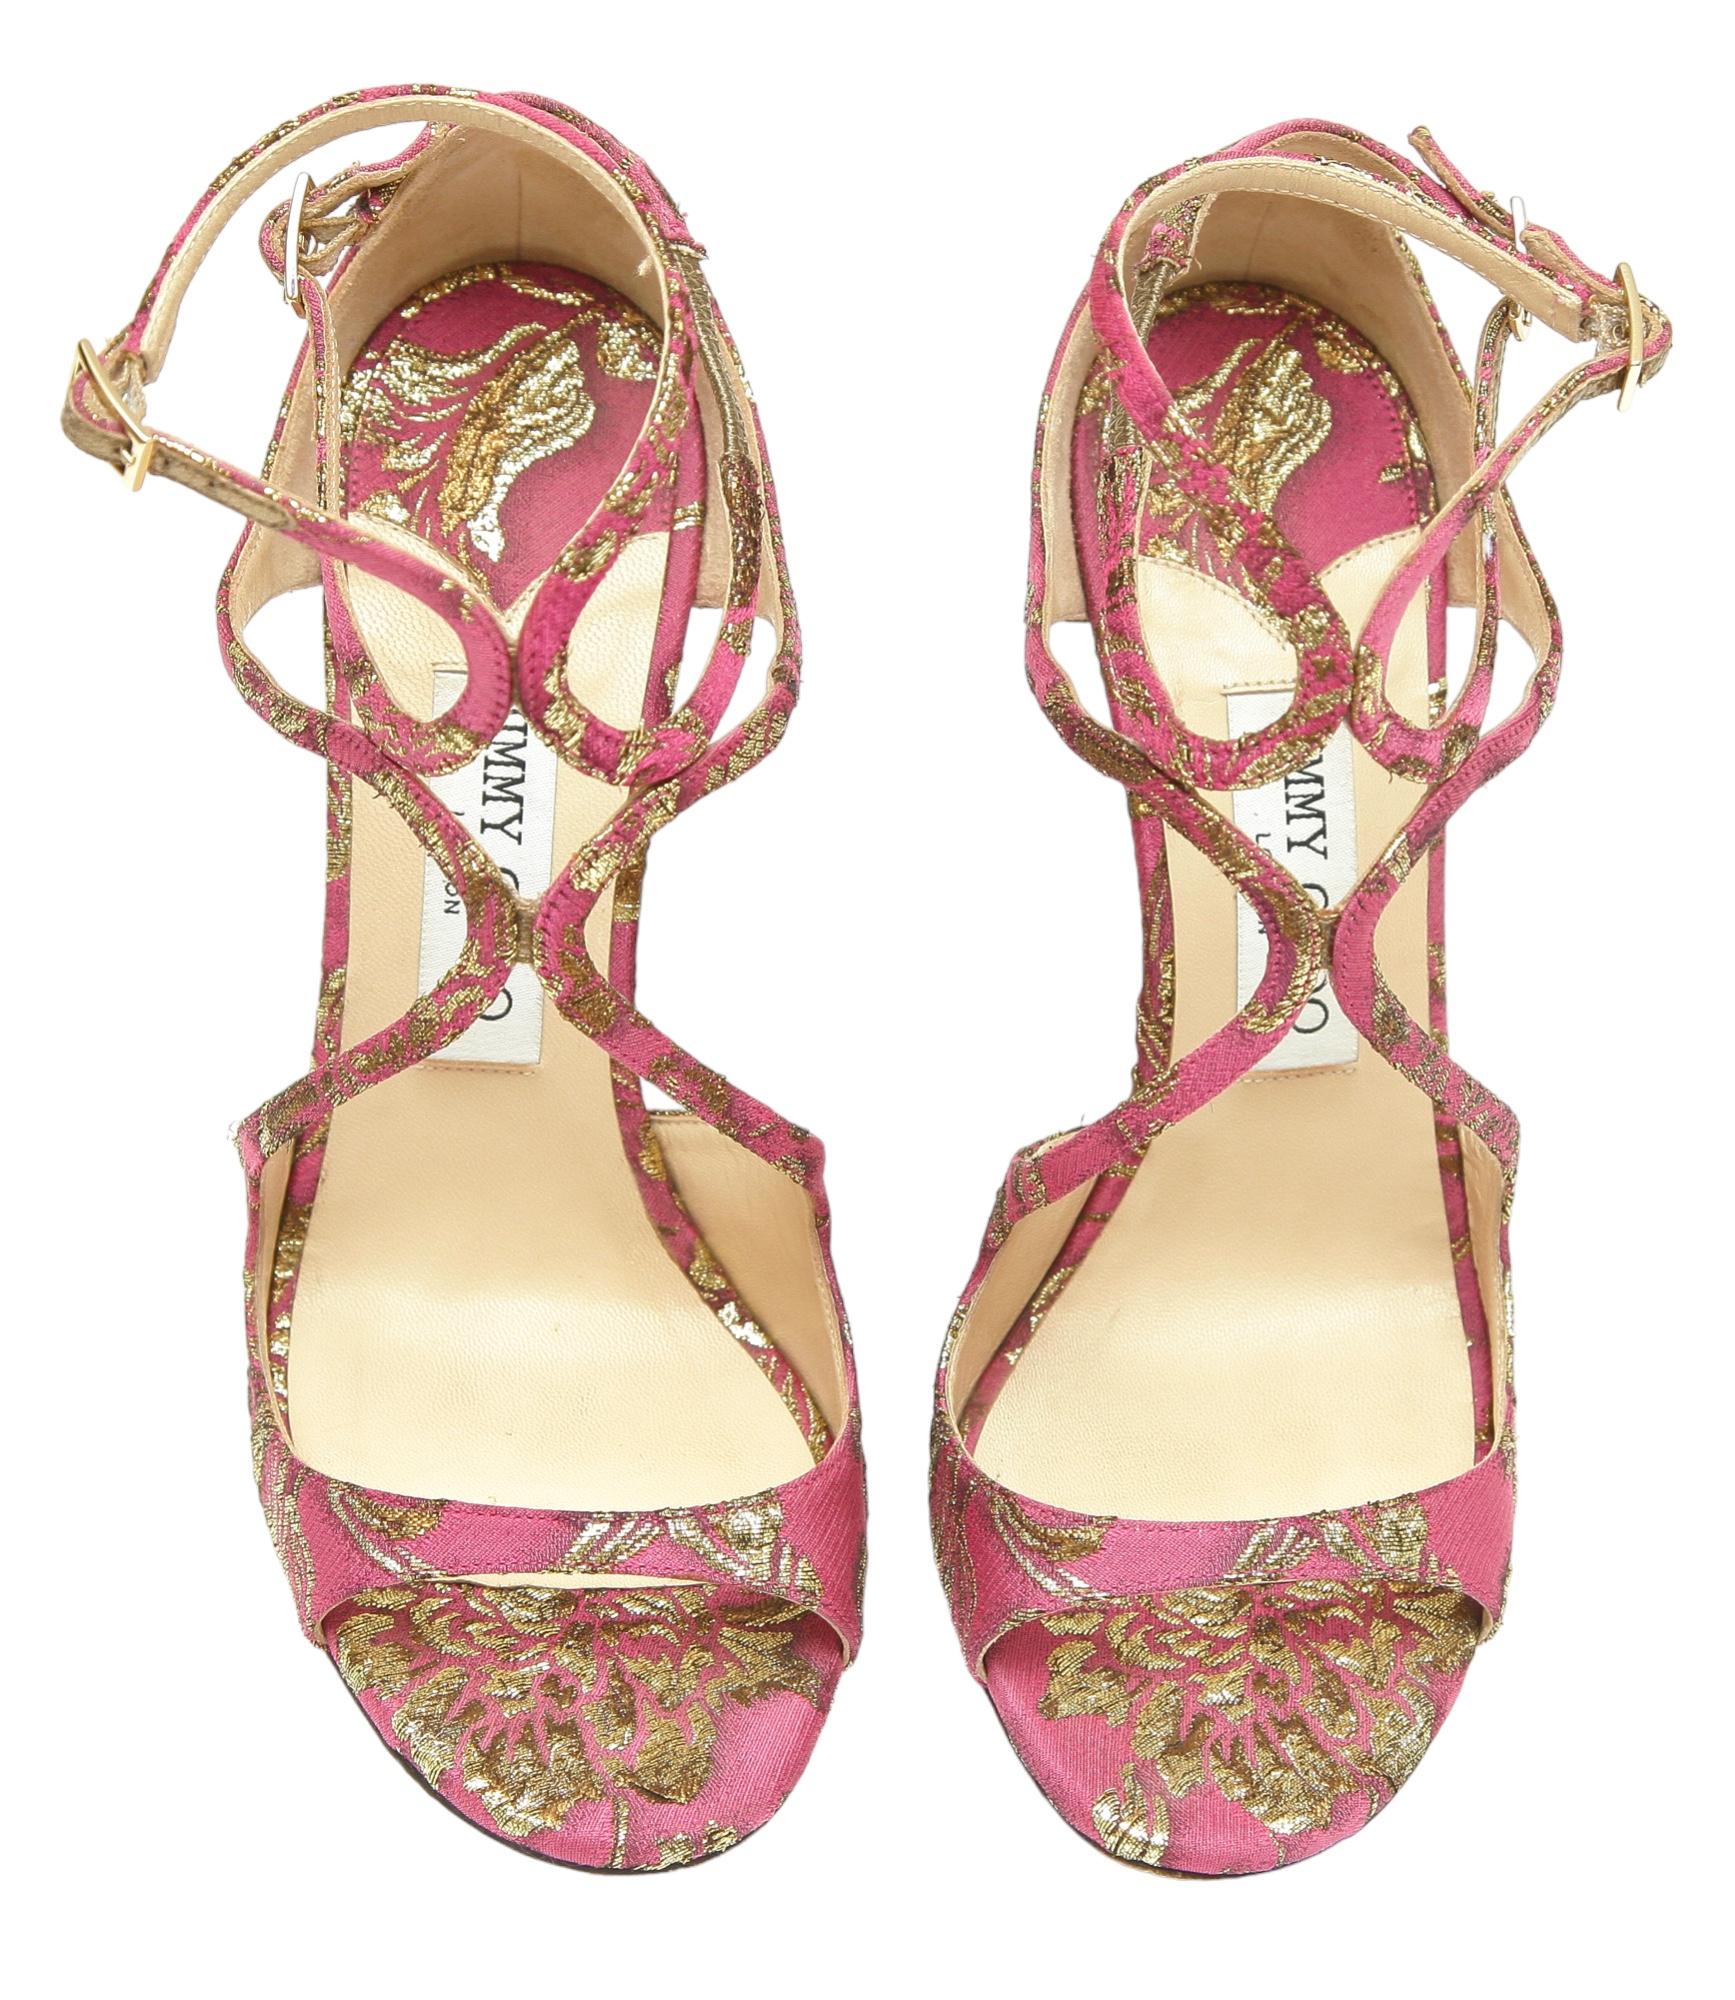 JIMMY CHOO Sandals Brocade Pink Gold Metallic LANCER Heels Leather Strappy 38 For Sale 7